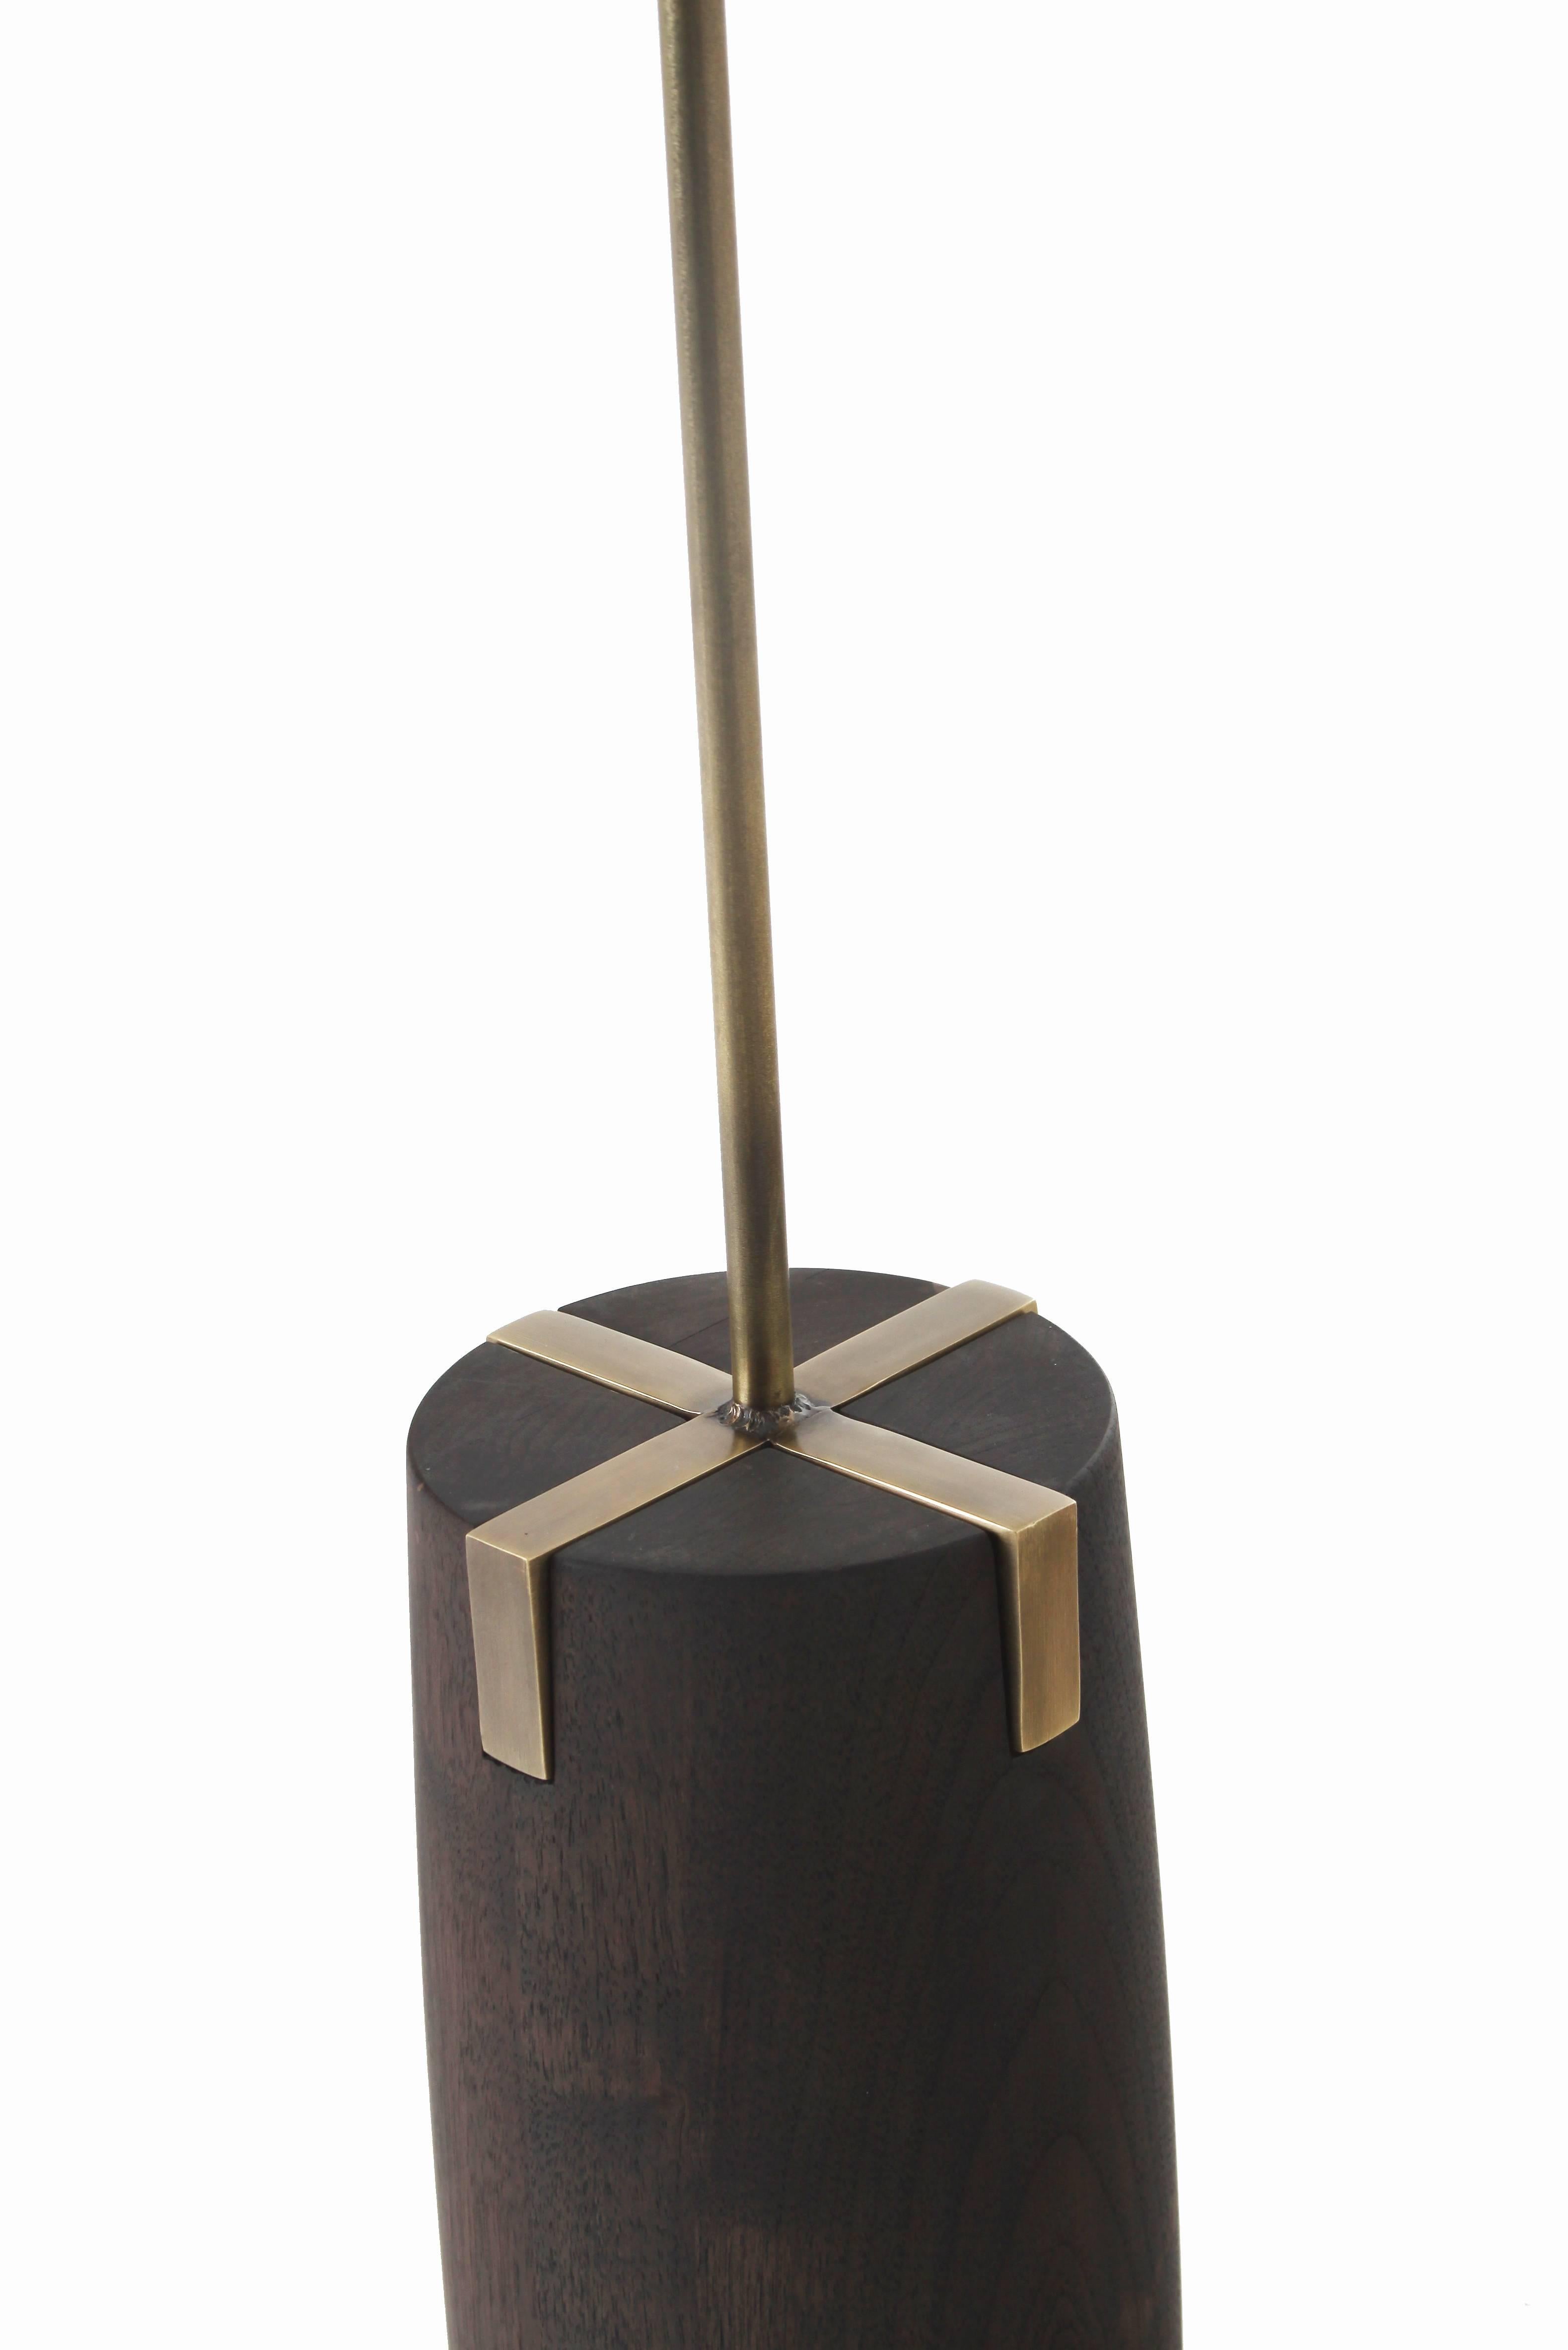 Contemporary Wood Floor and Table Cross Lamp by Thomas Hayes Studio For Sale